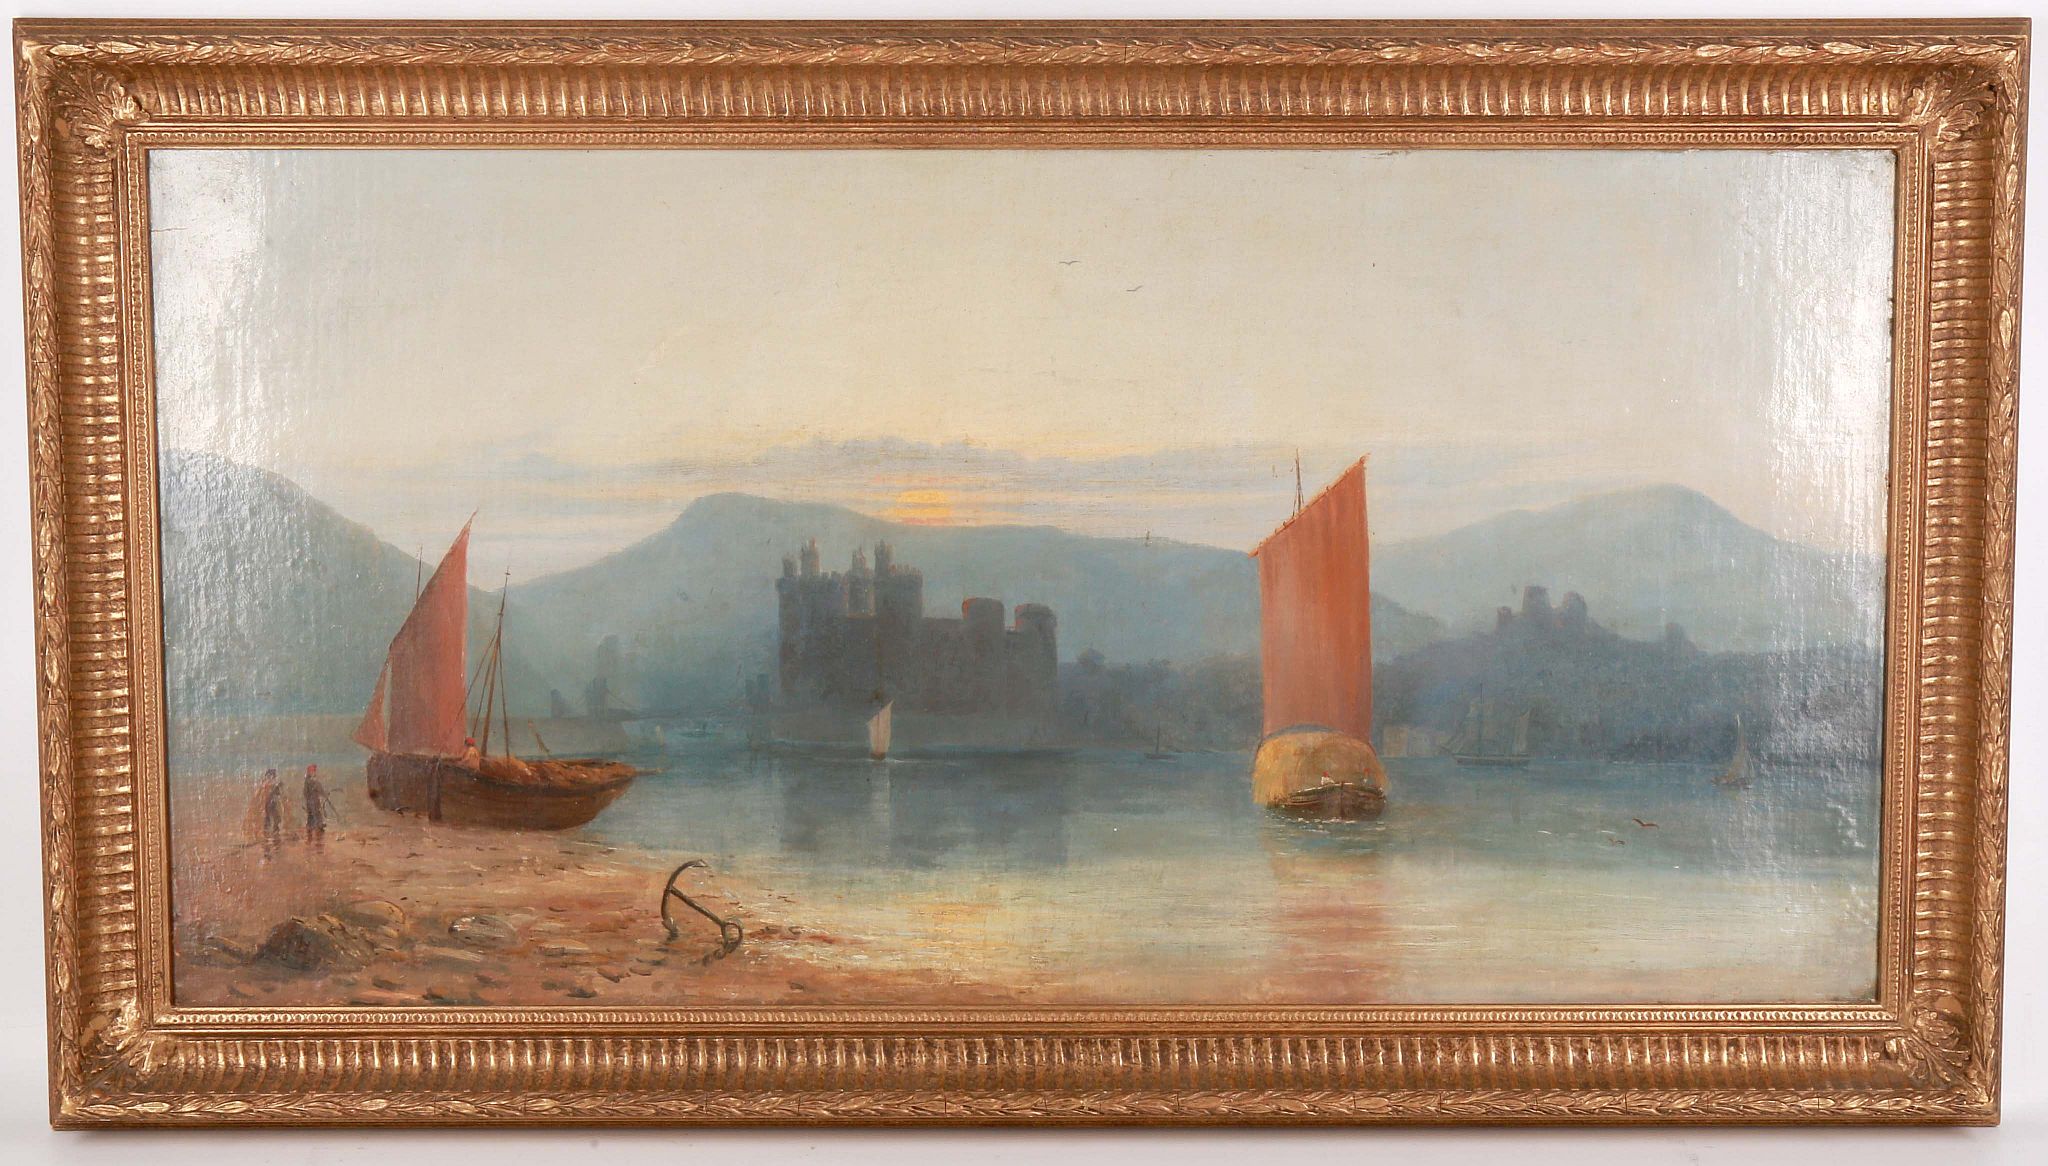 Mid 19th Century Continental school, possibly Italian. Boating traffic on a Swiss lake with